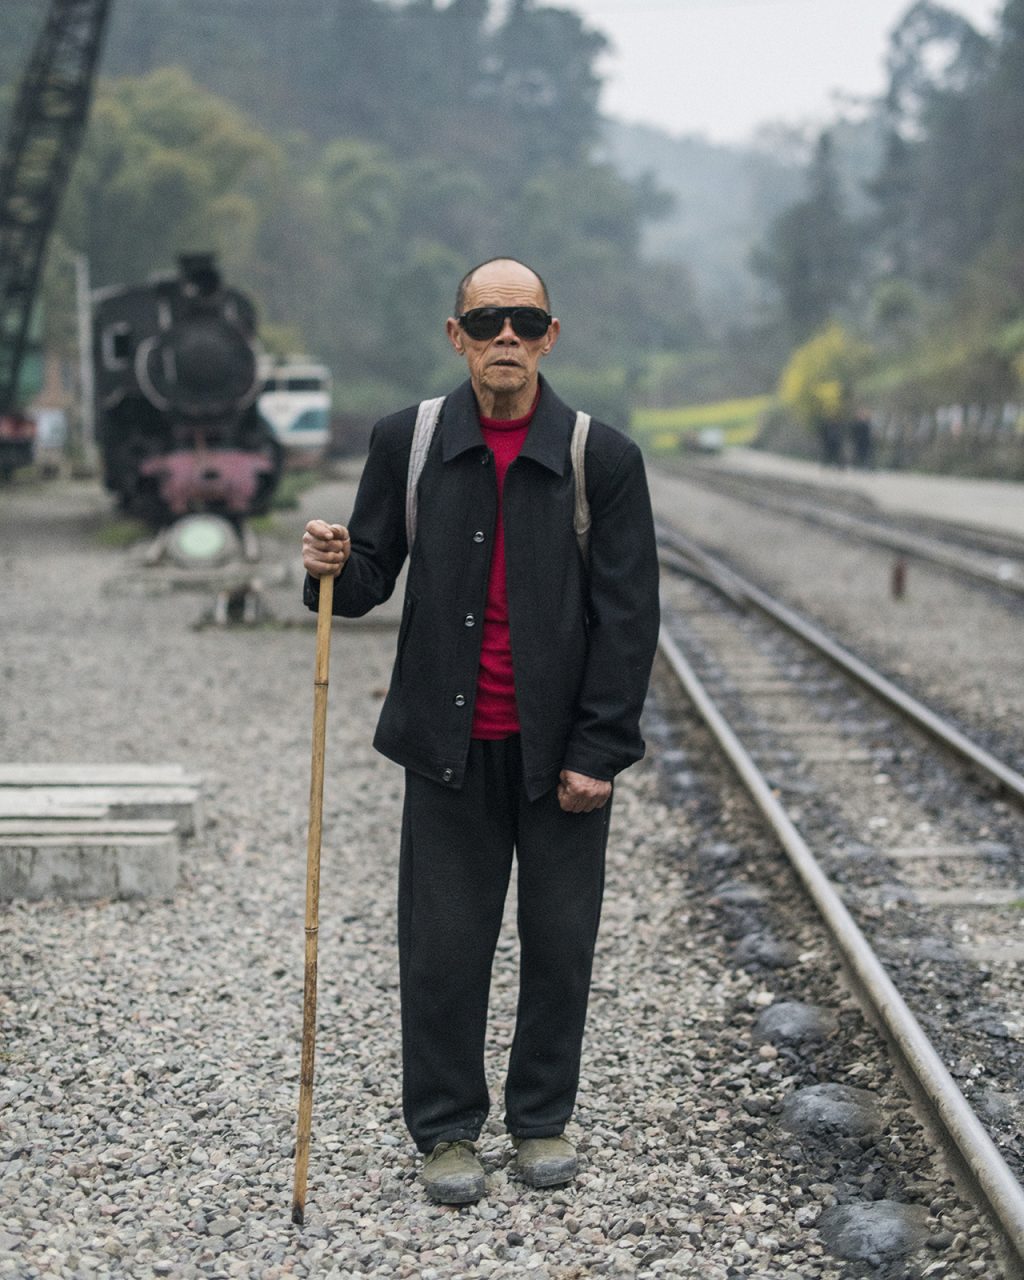 Huang Hongmin, a retired miner, has ridden the steam train for the past half-century